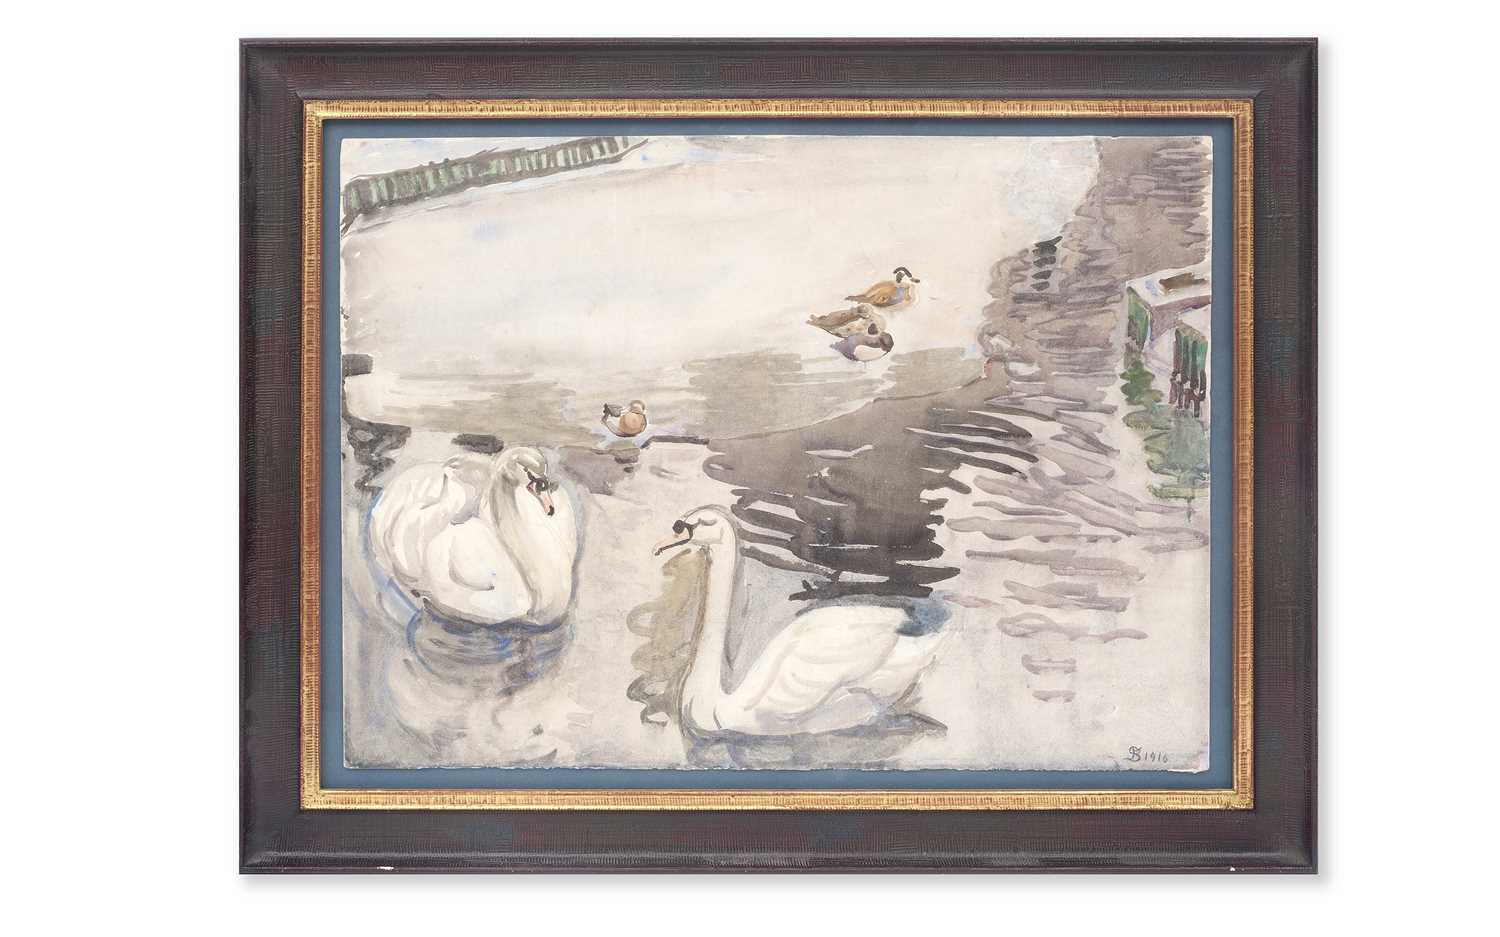 FRITZ SYBERG (1862-1939): A PAINTING OF SWANS, 1916